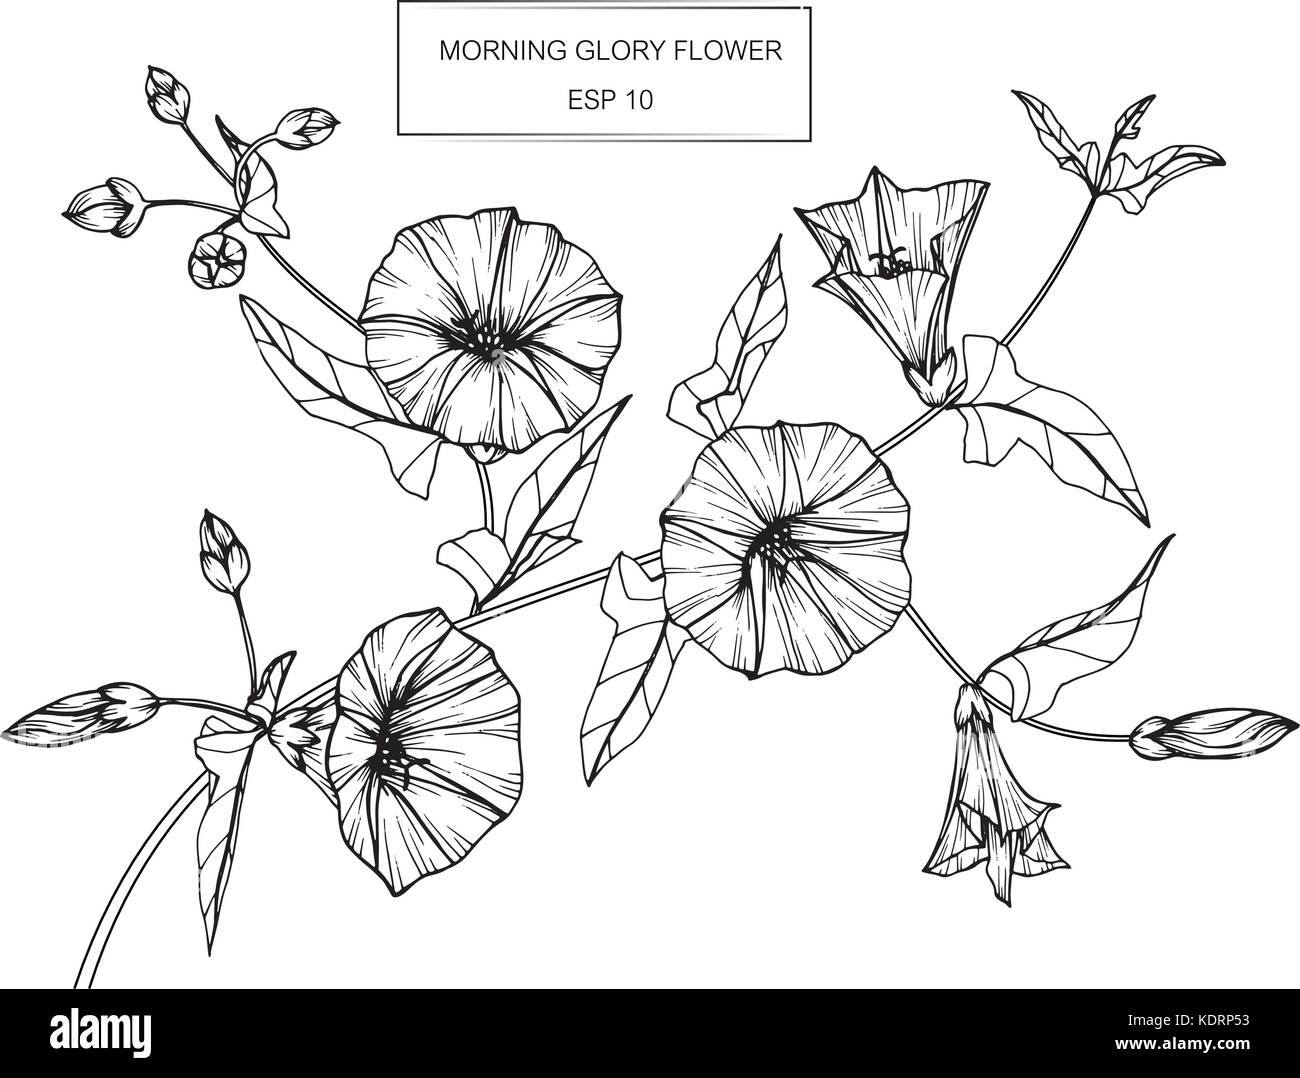 Morning glory flower drawing illustration. Black and white with line art. Stock Vector